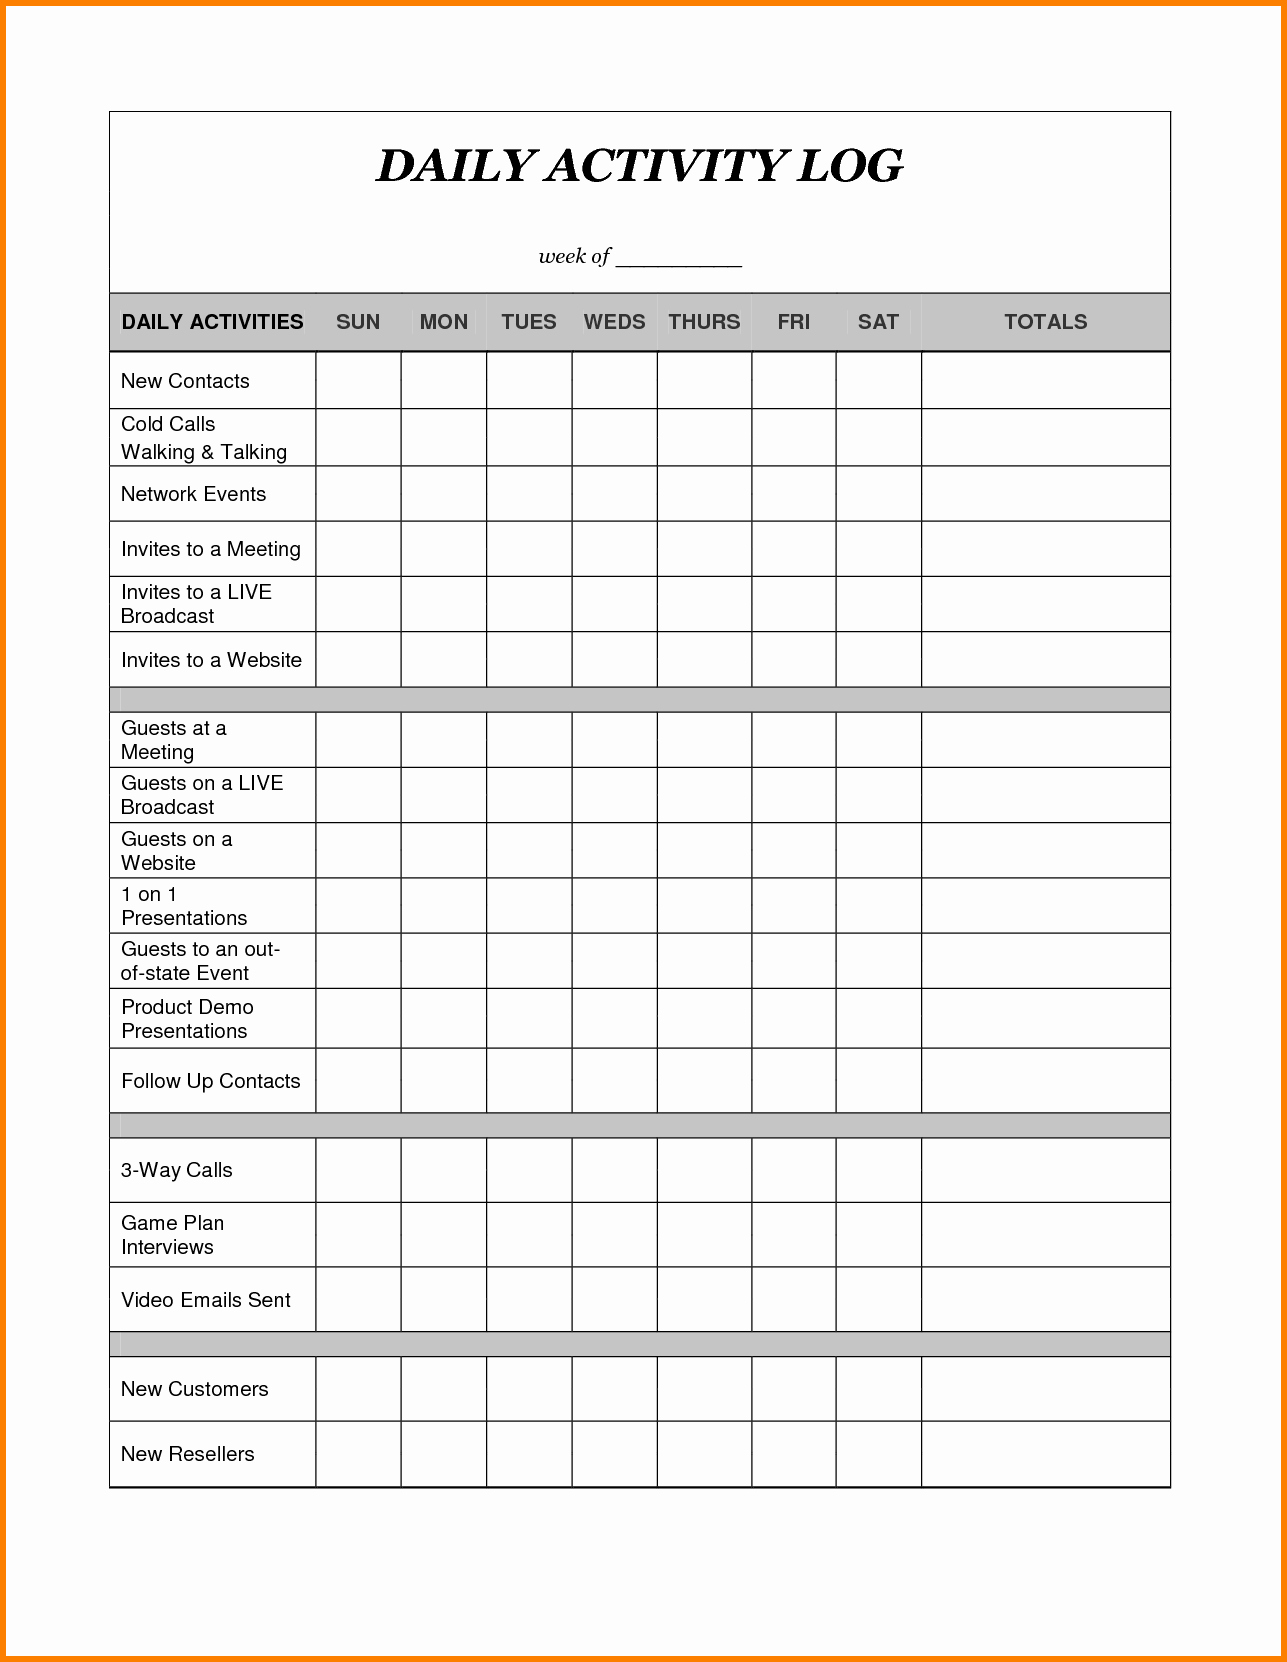 Security Officer Daily Activity Report Sample Fresh Activity Report Template Daily Pdf Security Ficer Excel